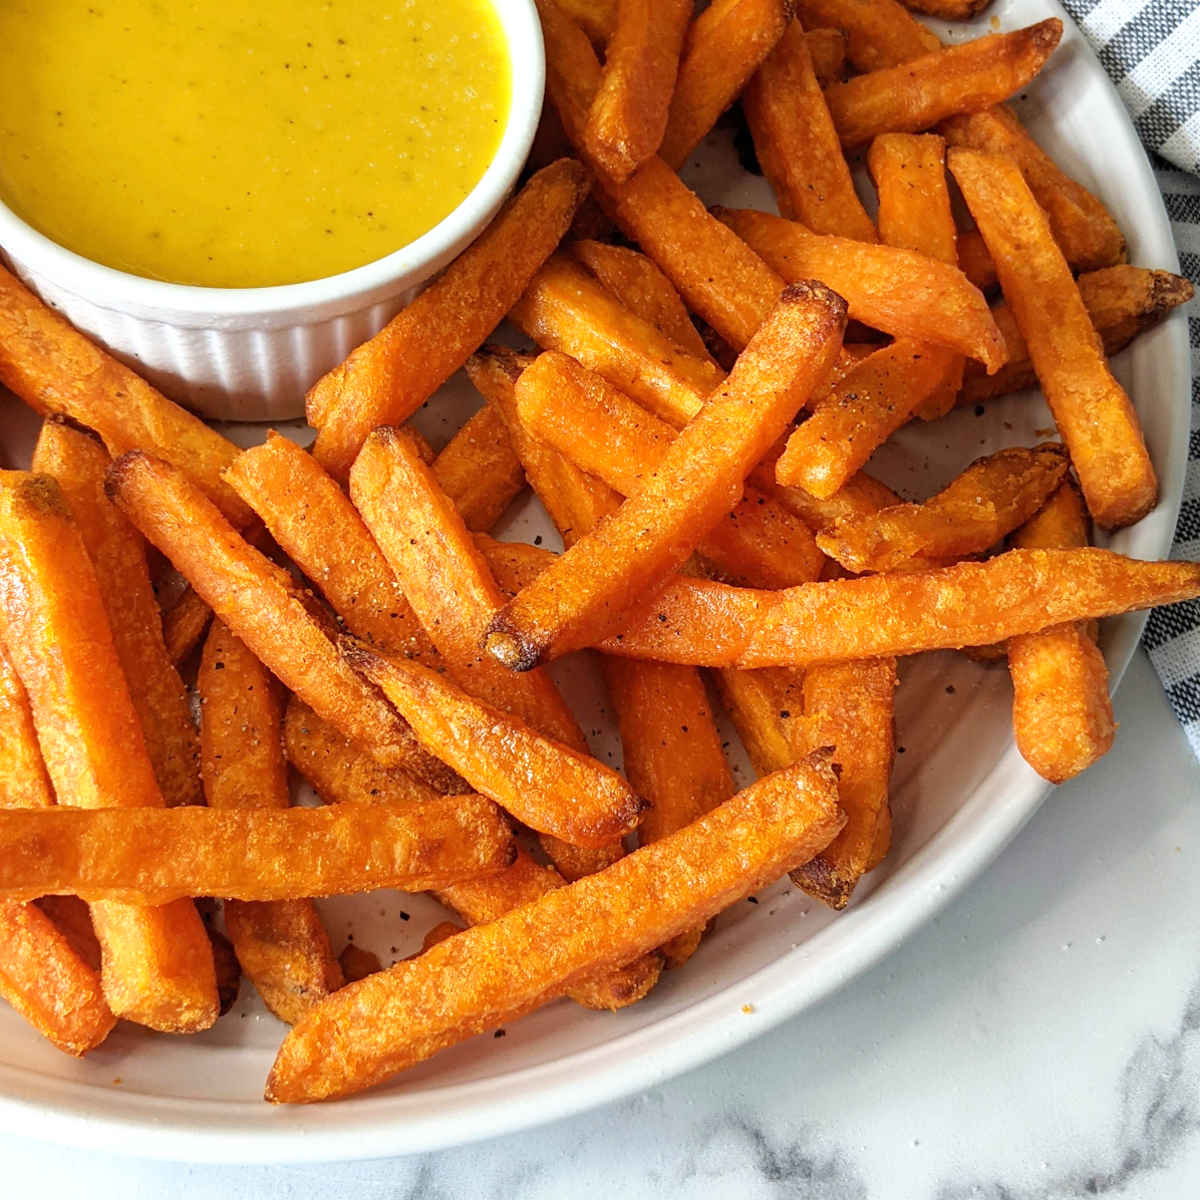 Easily Cook Frozen Sweet Potato Fries in the Air Fryer